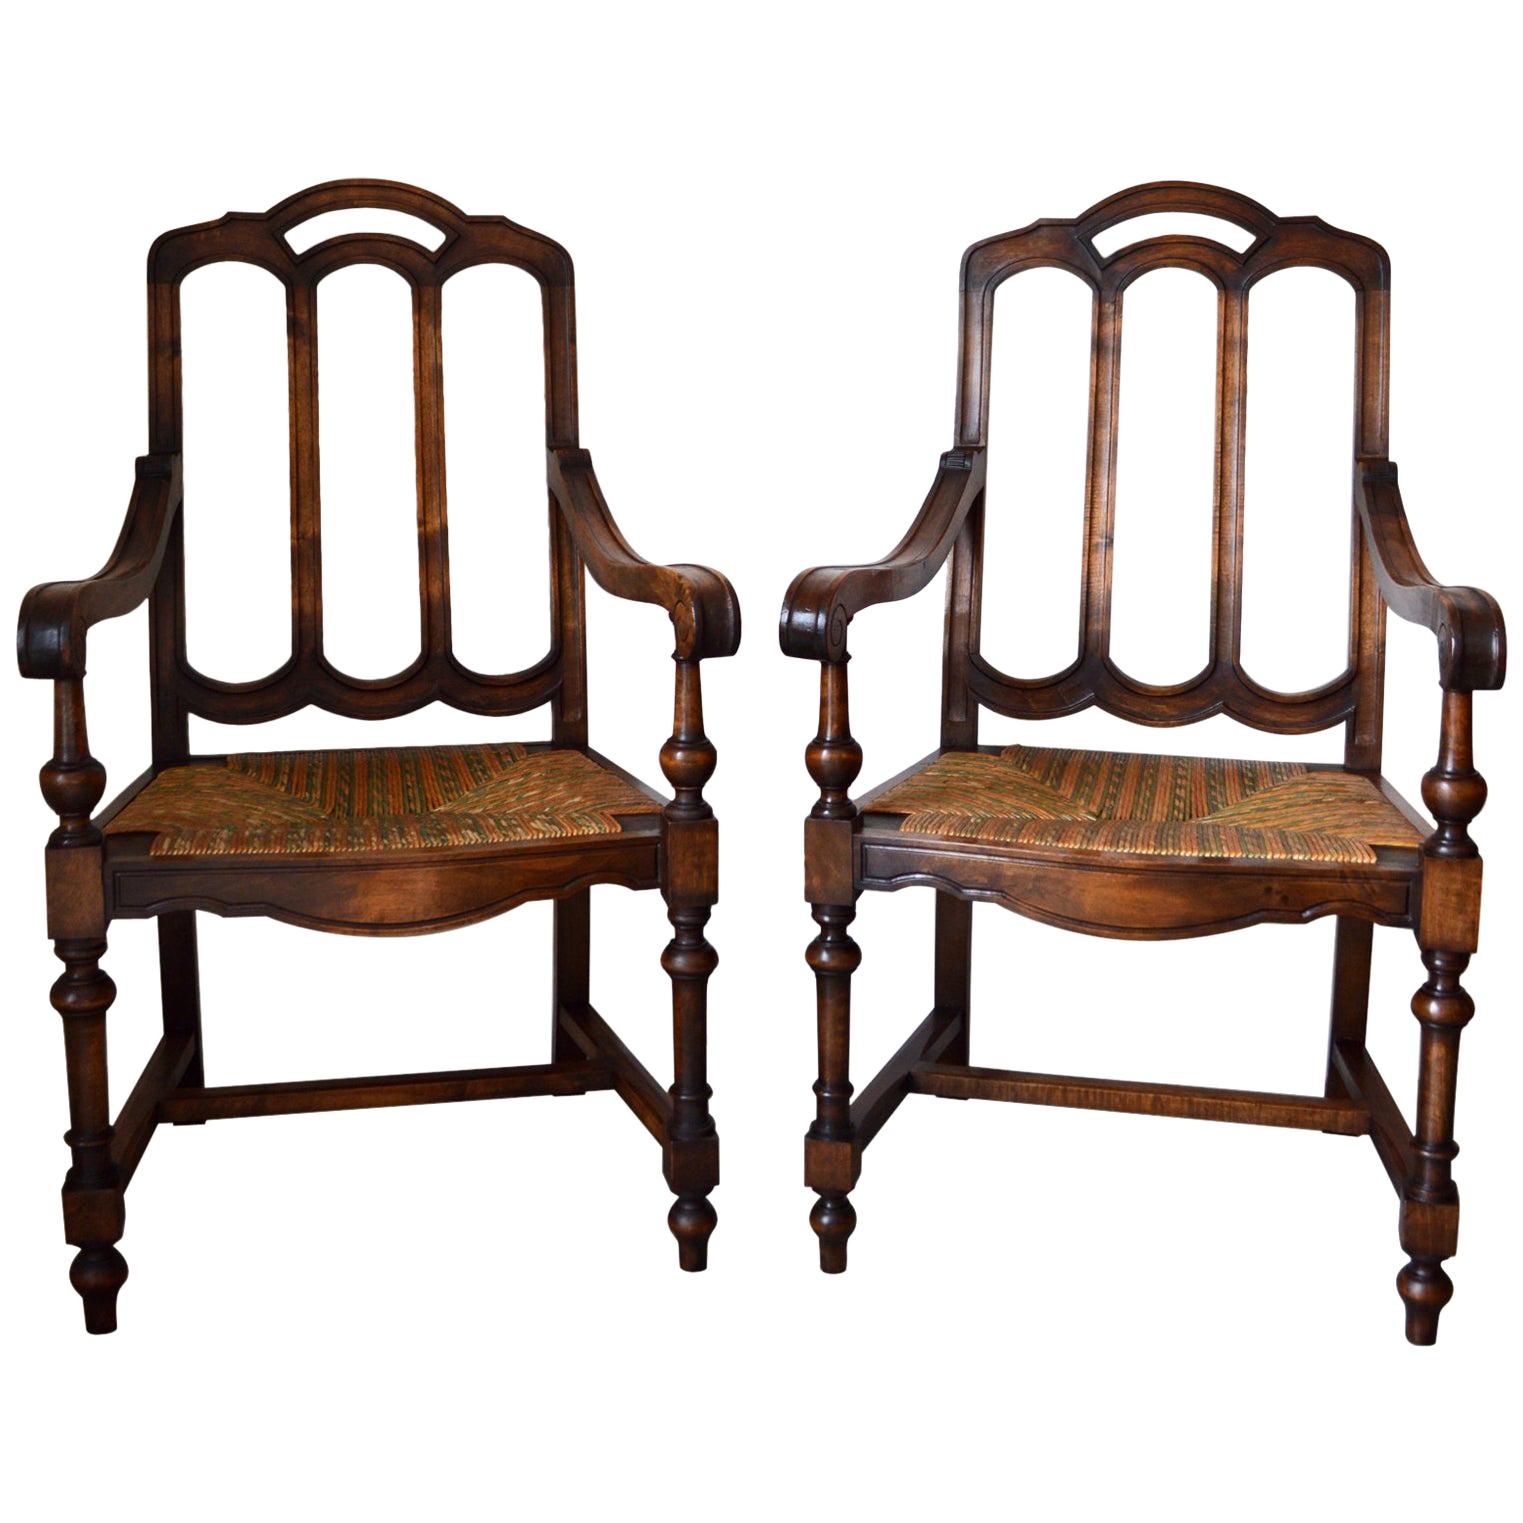 Pair of French Gothic Revival Rush Seat Armchairs in Walnut, circa 1890 For Sale